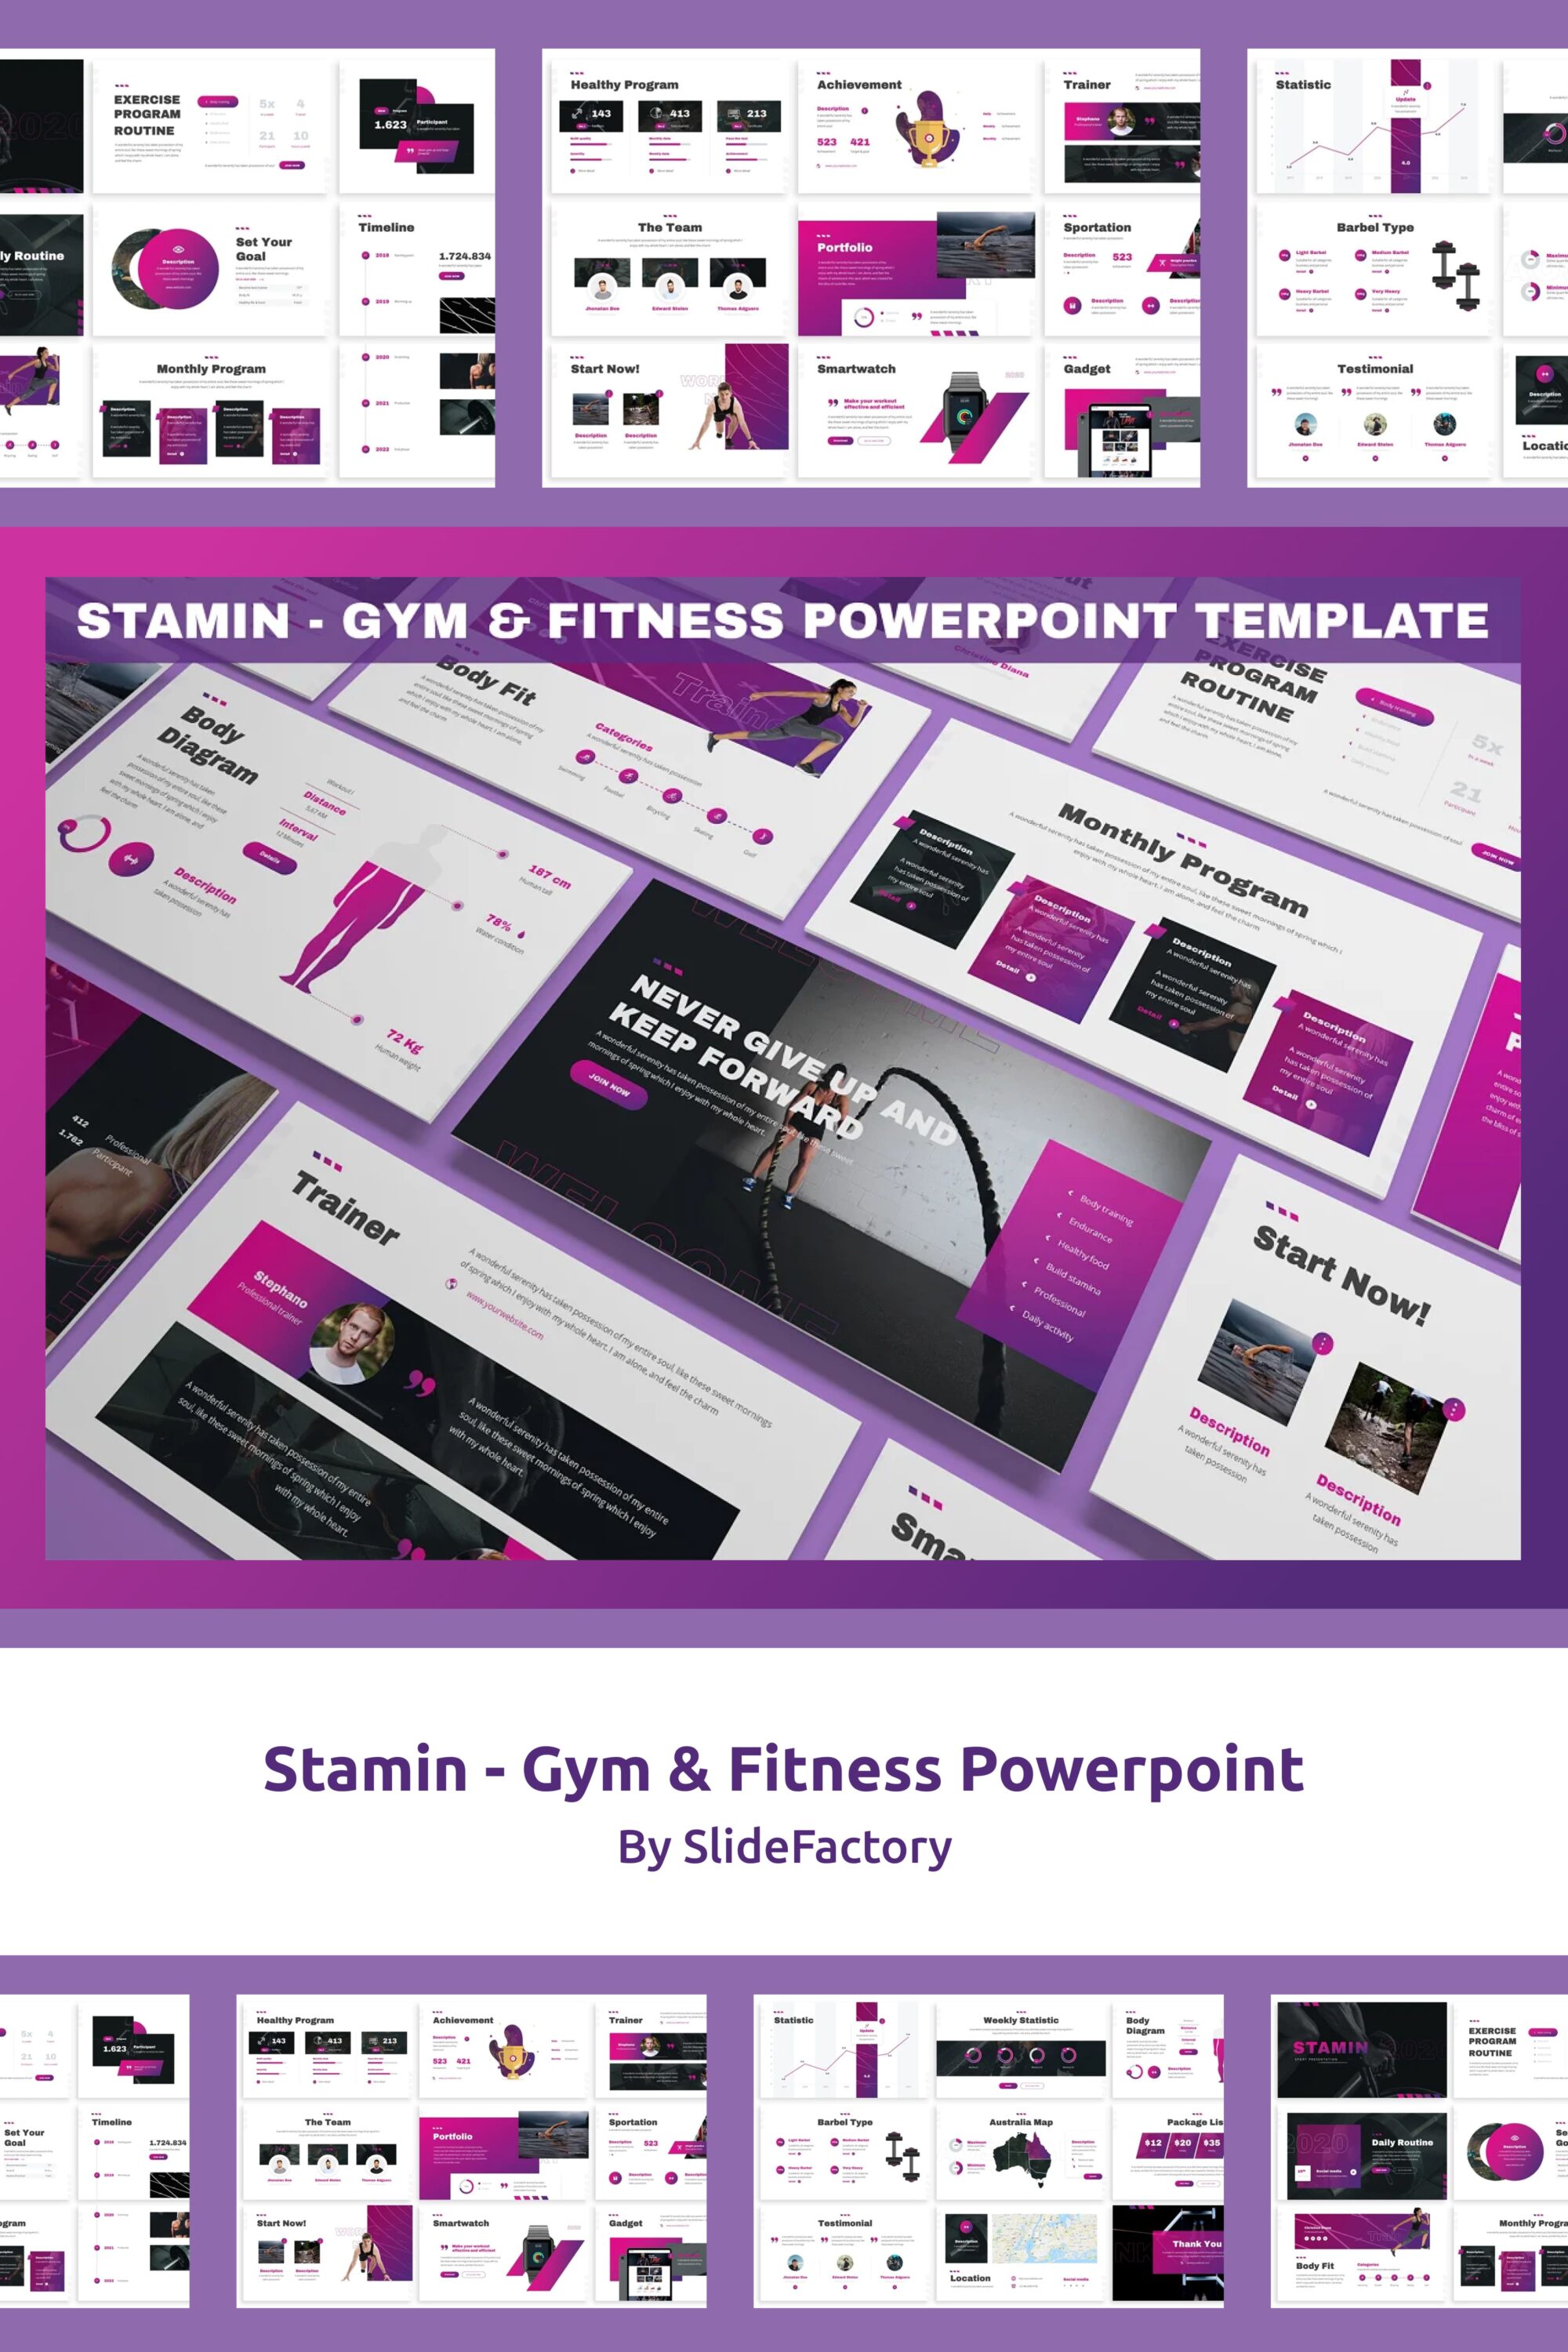 stamin gym fitness powerpoint 03